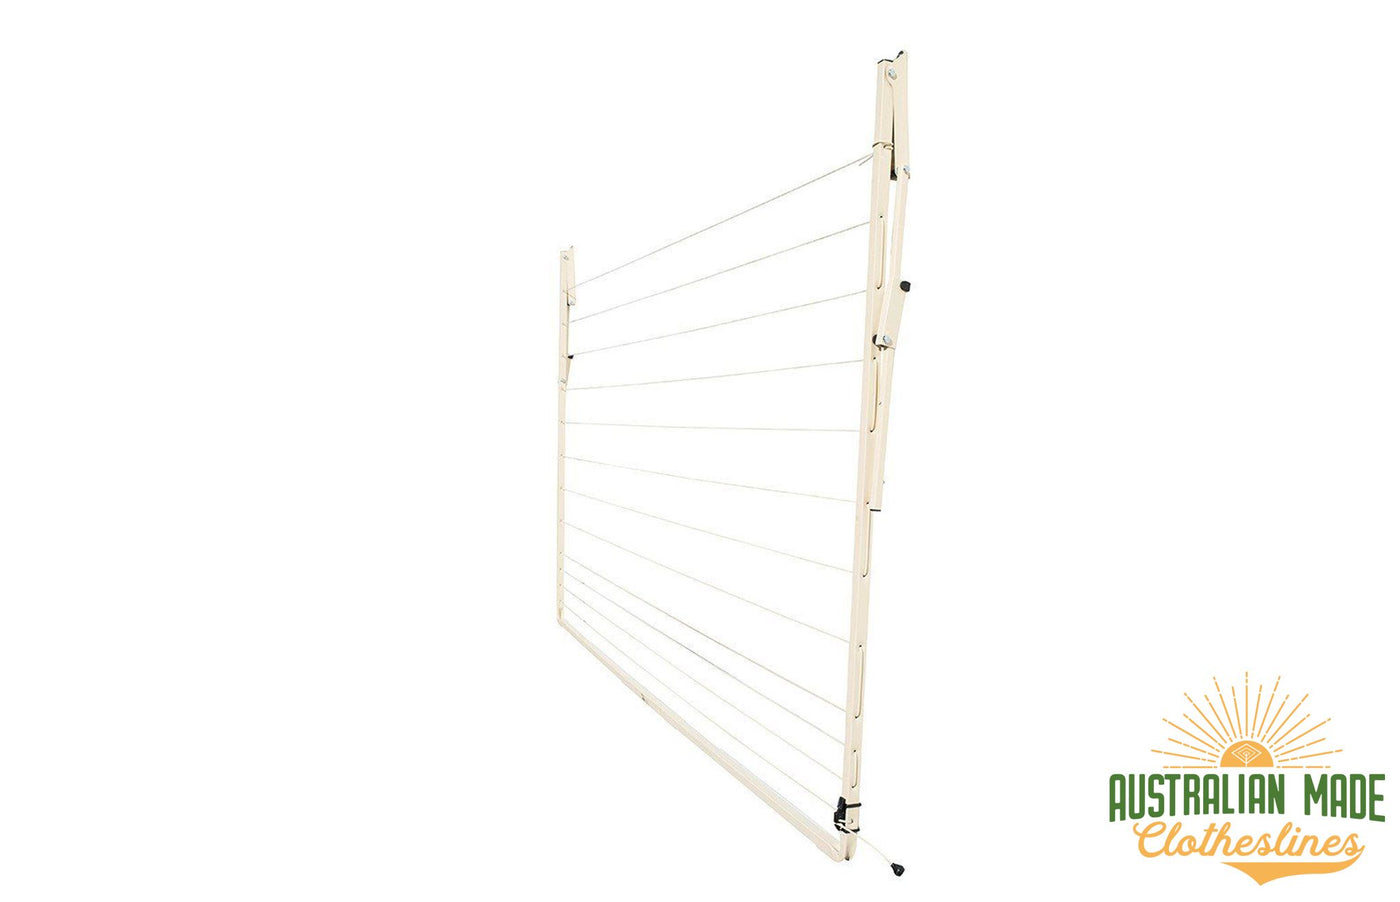 Austral Standard 28 Clothesline - Classic Cream Right Side Folded Down - Australian Made Clotheslines